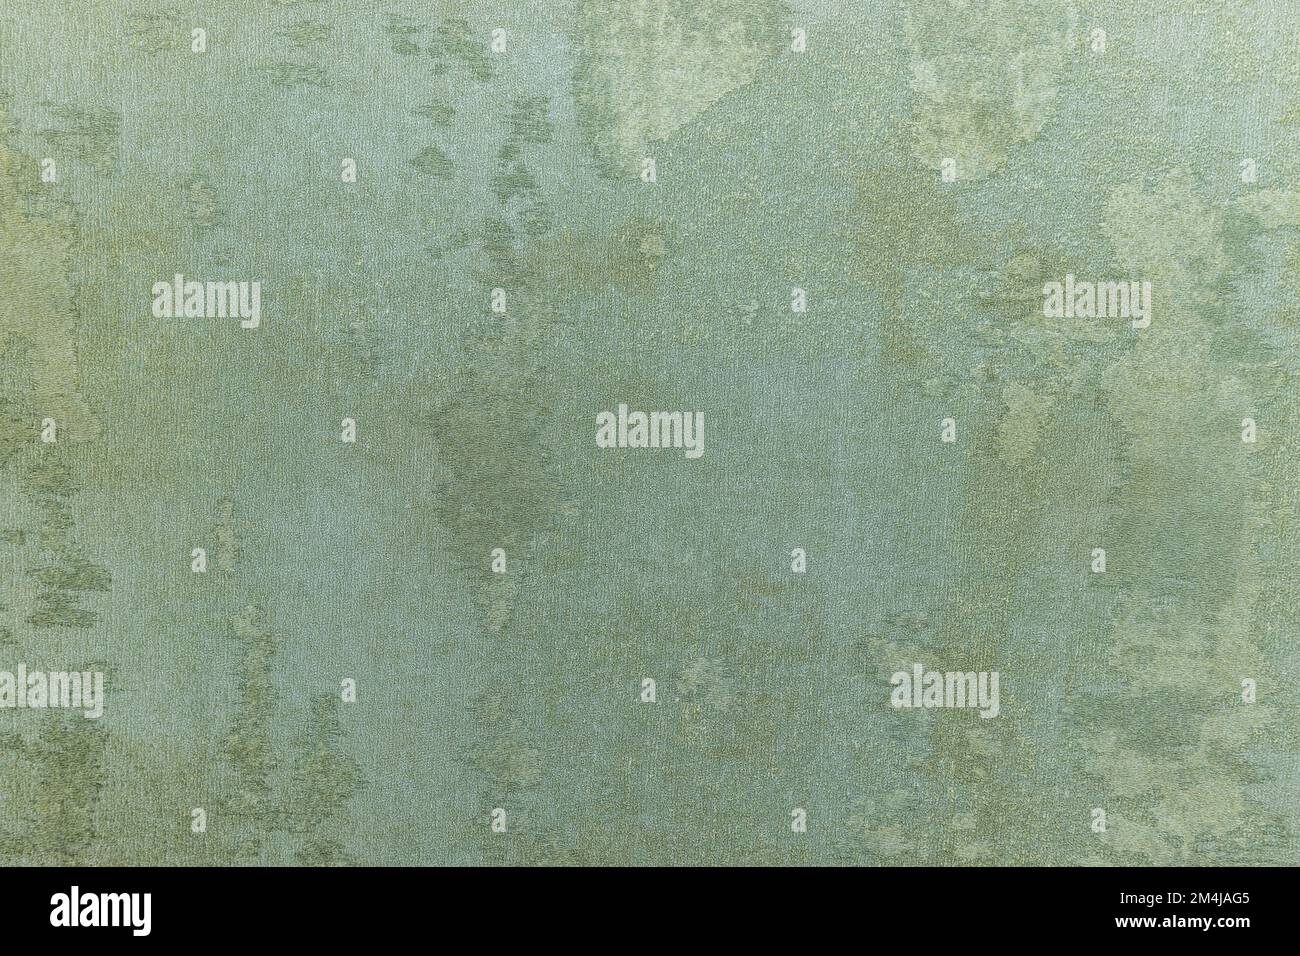 Aged vinyl wallcovering texture with various shades Stock Photo